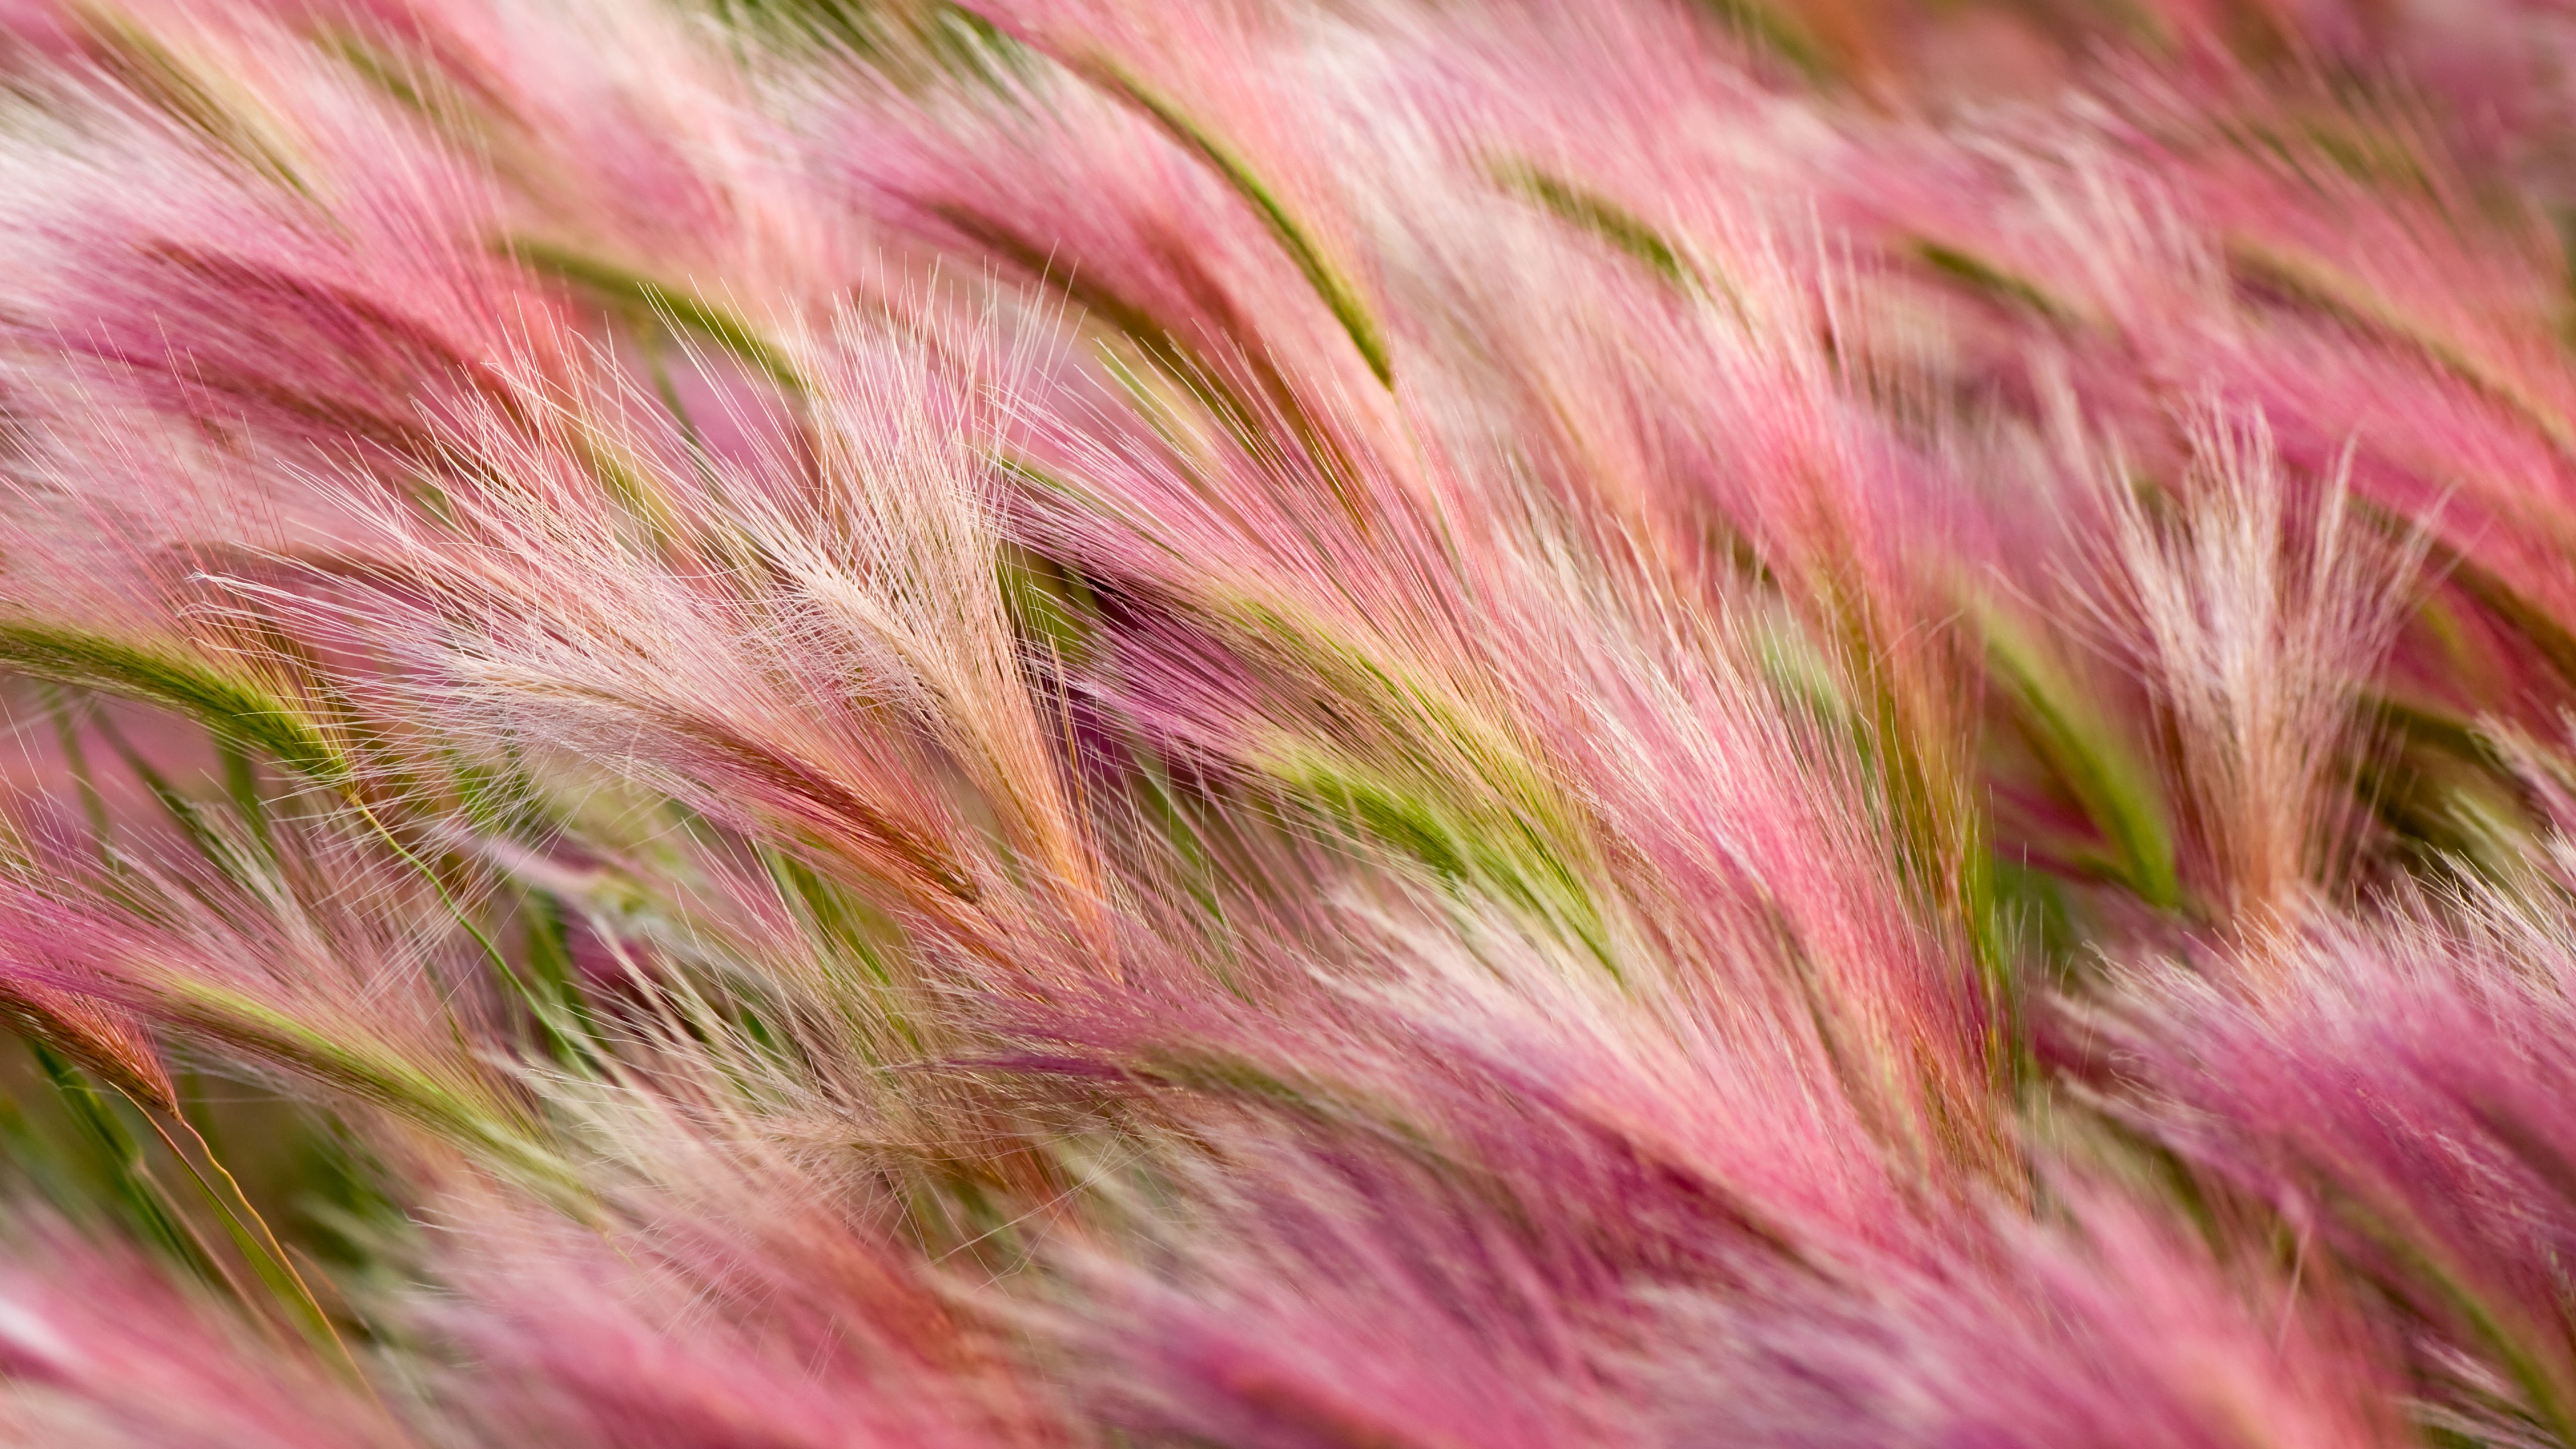 Foxtail Barley. Watermelon Awesome. Landscape wallpaper, Nature